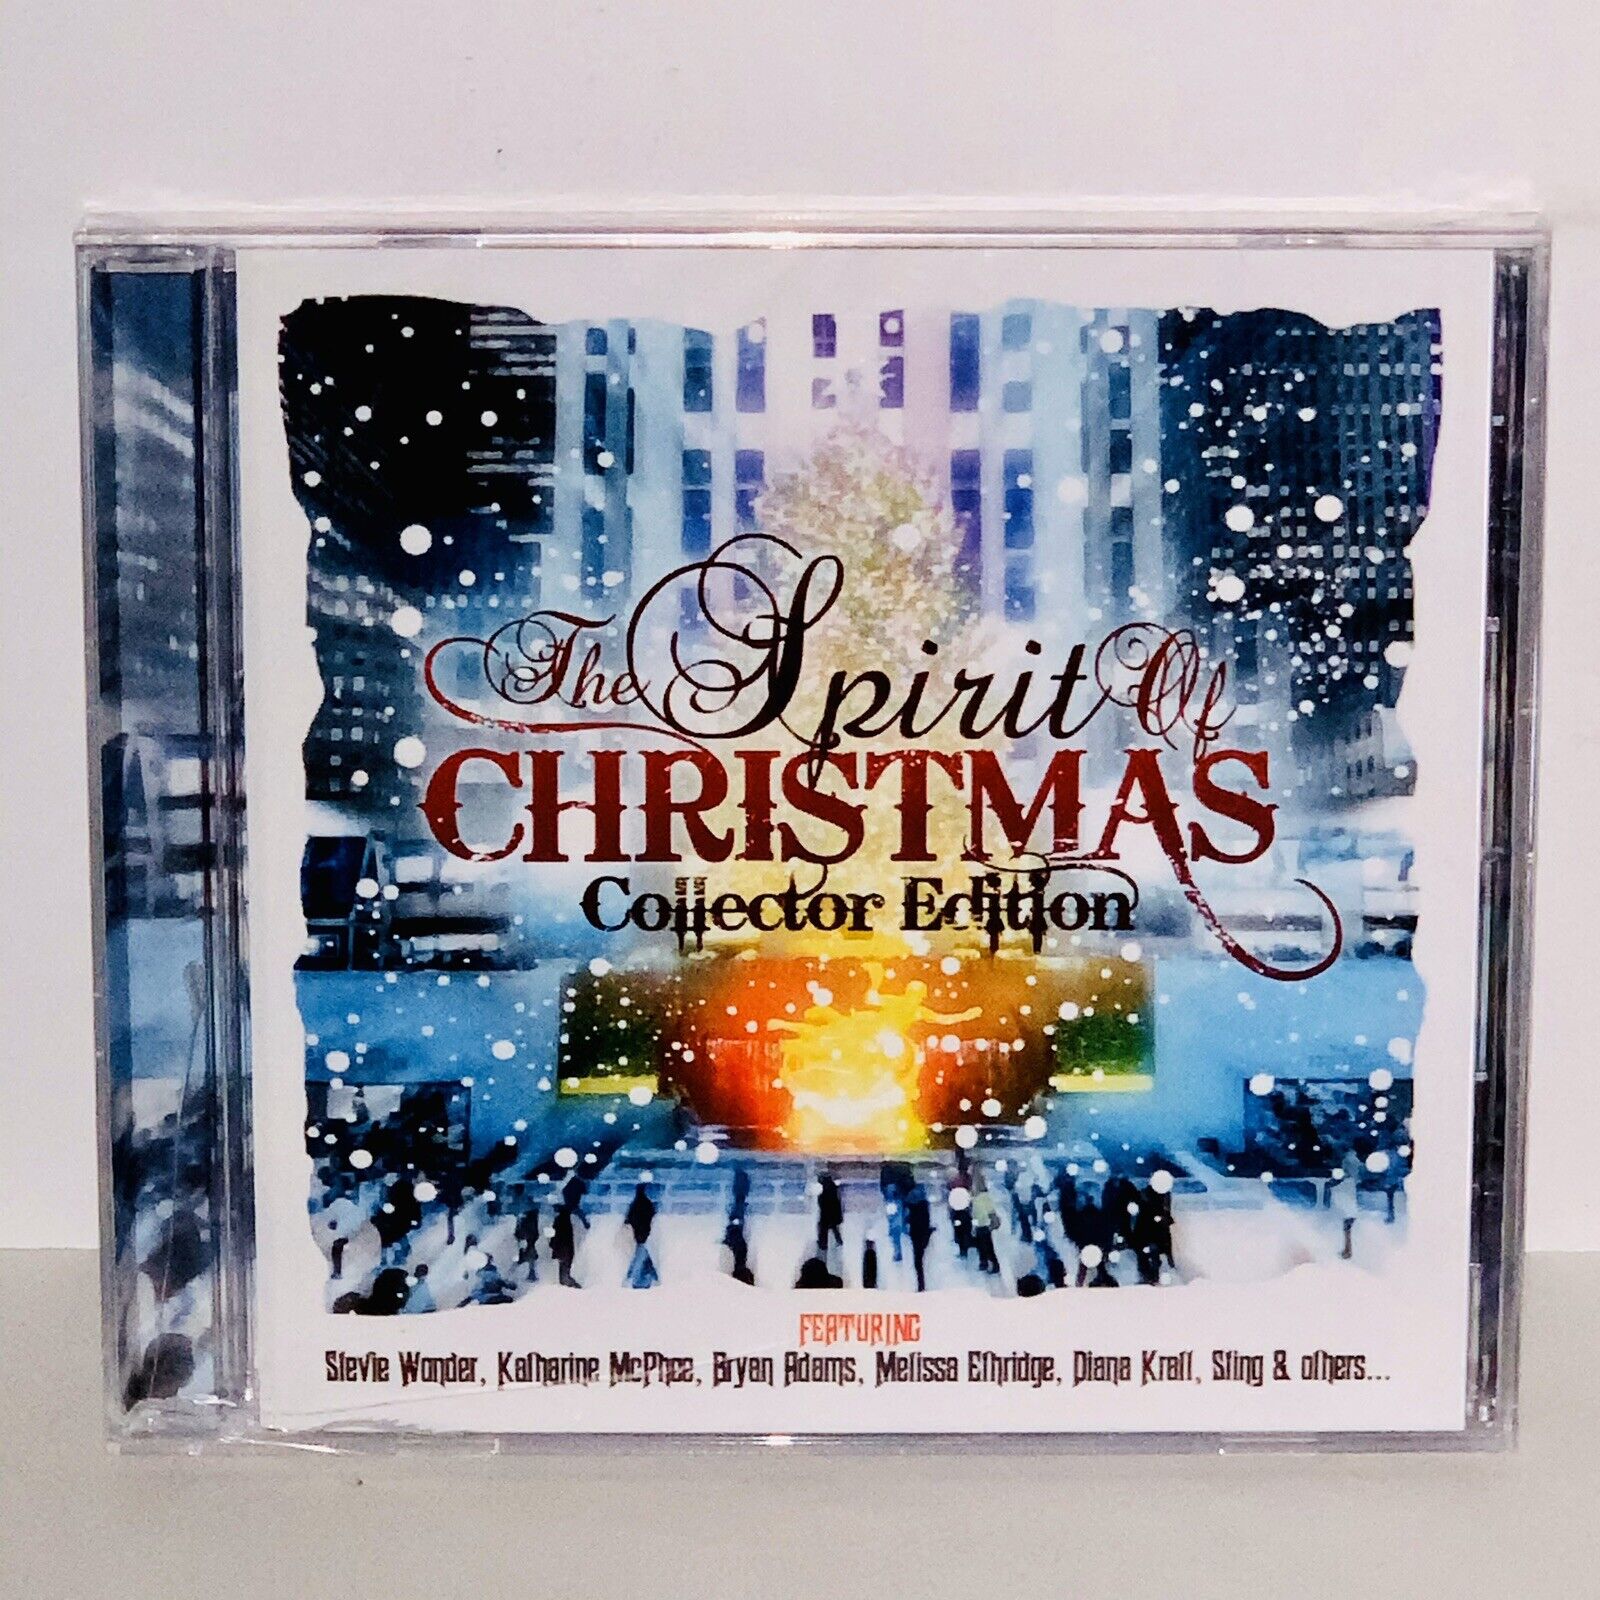 Factory Sealed (shrink wrapped) The Spirit of Christmas Collector Edition CD